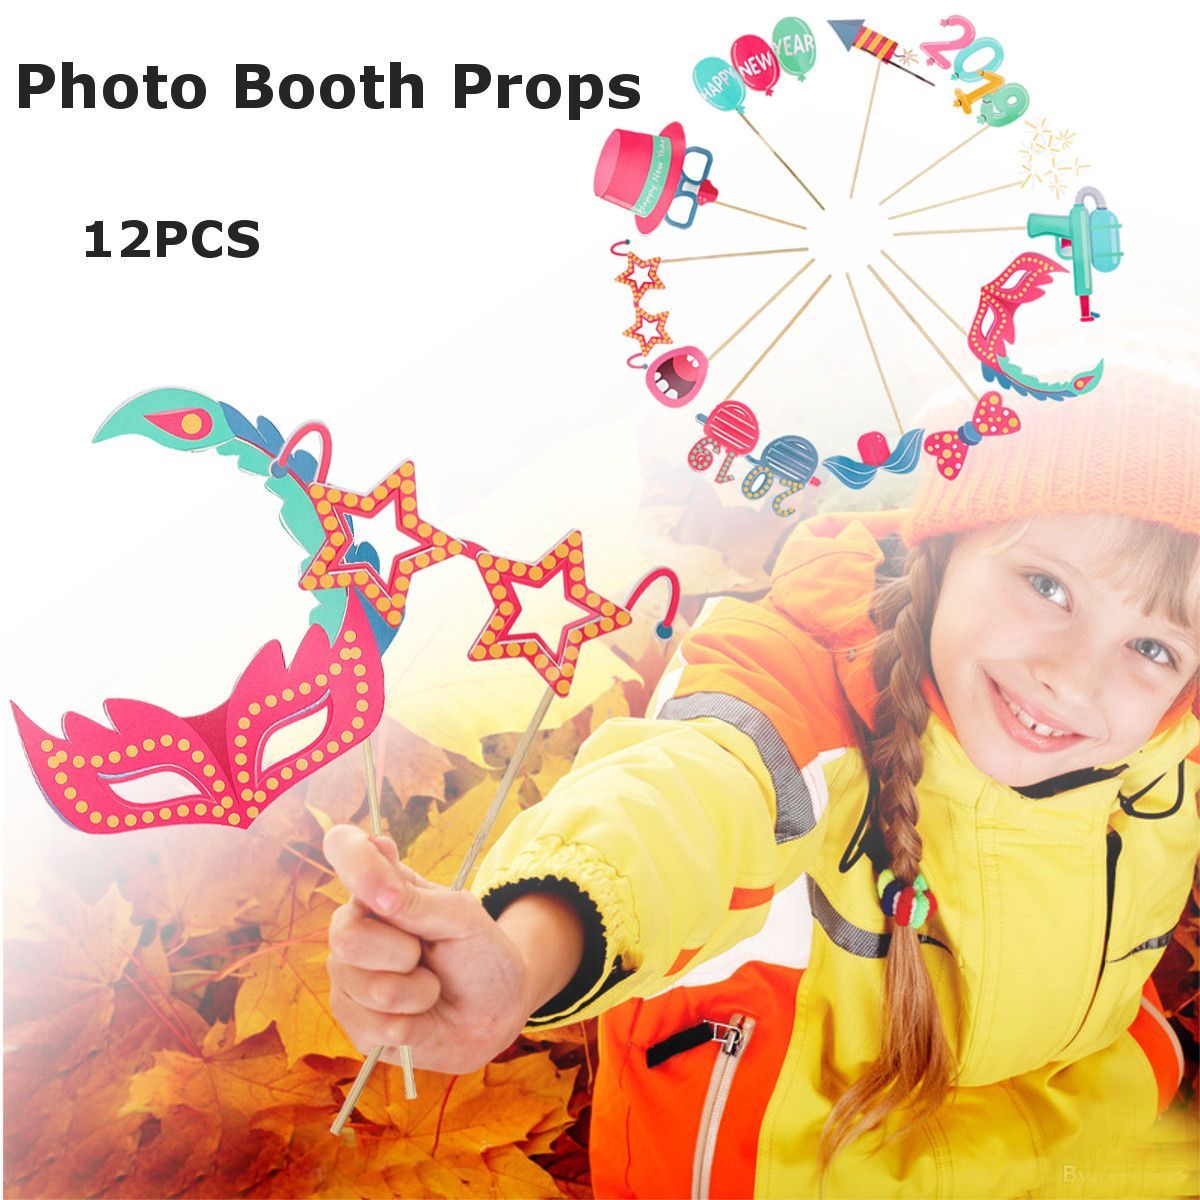 Photo-Booth-Props-Bridal-Shower-Hens-Night-Party-Wedding-Decor-Supplies-1470736